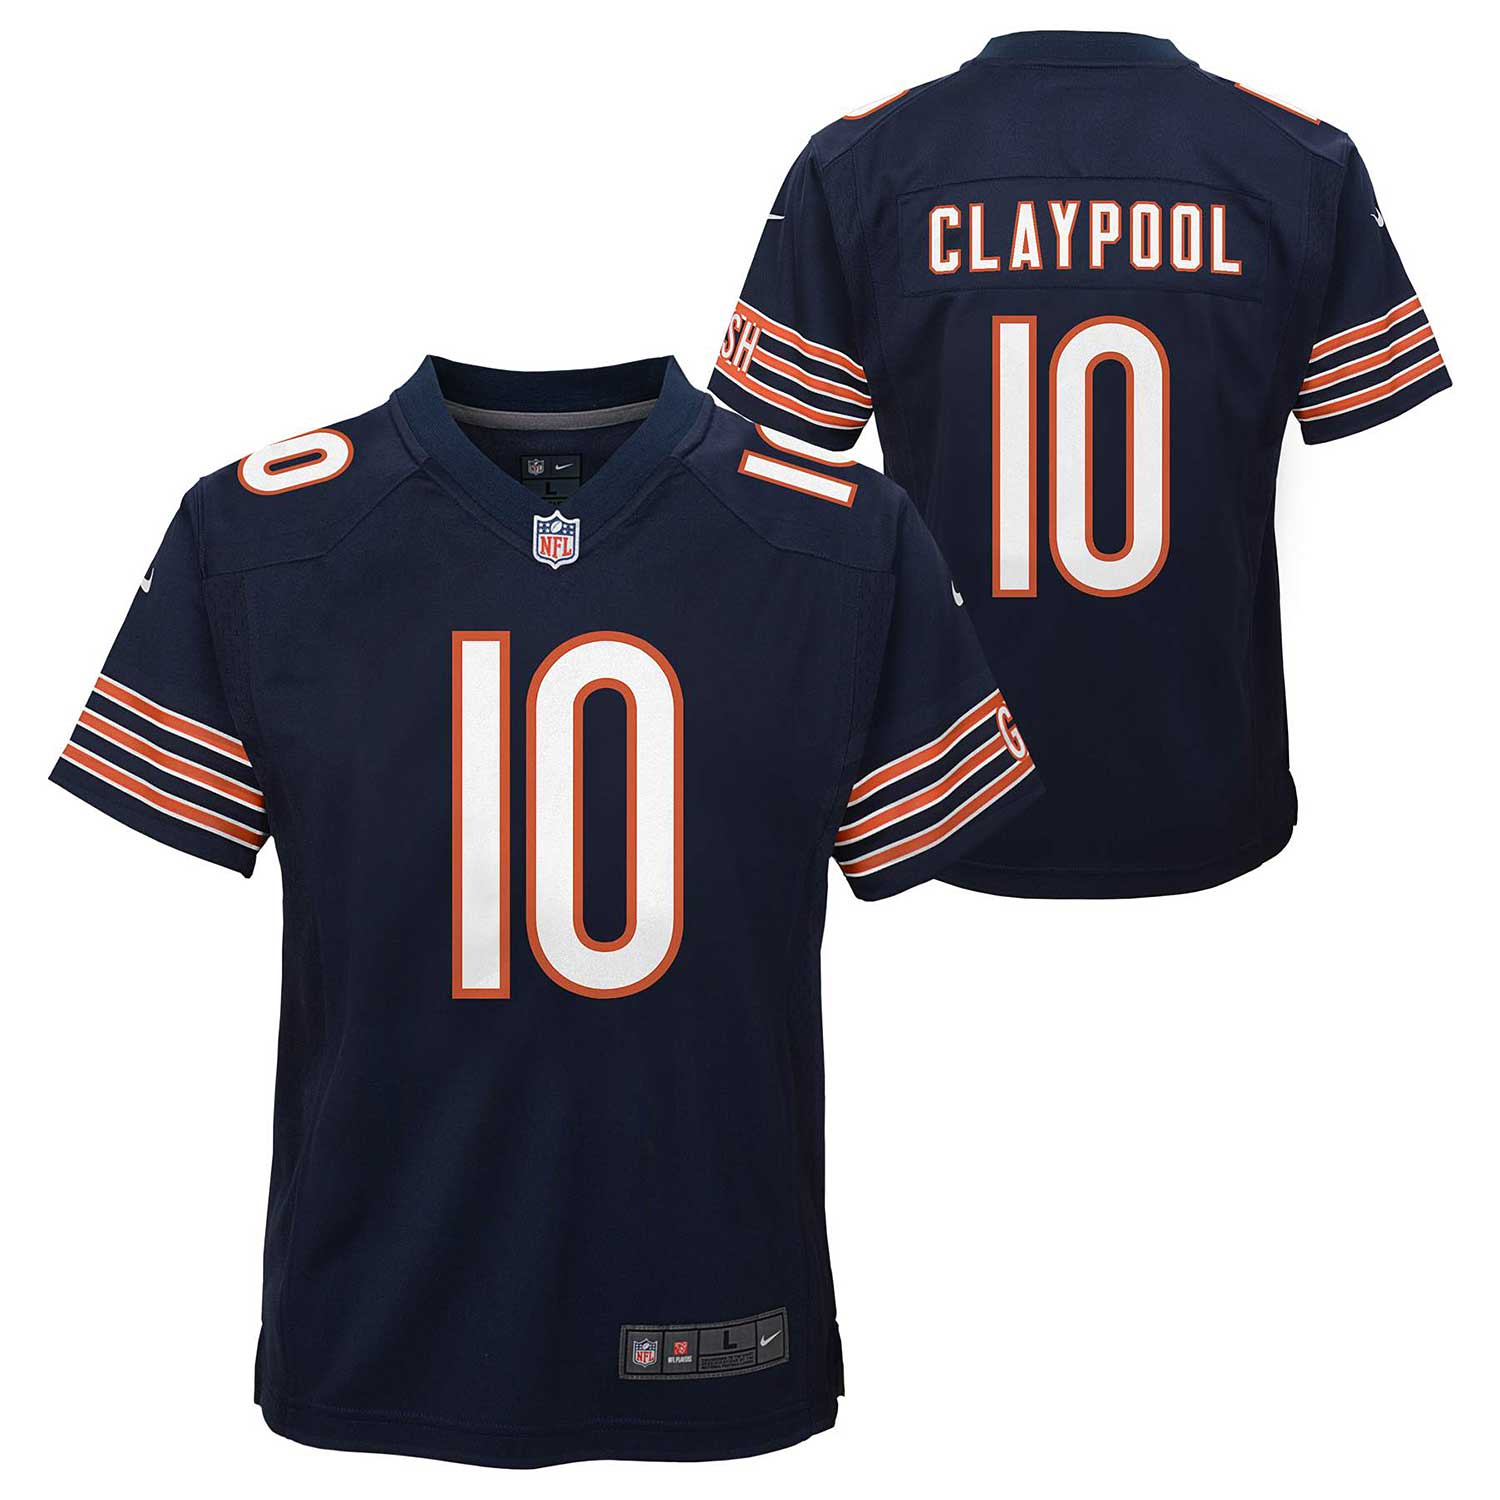 Chicago Bears Chase Claypool Nike Home Youth Replica Jersey Large = 14-16